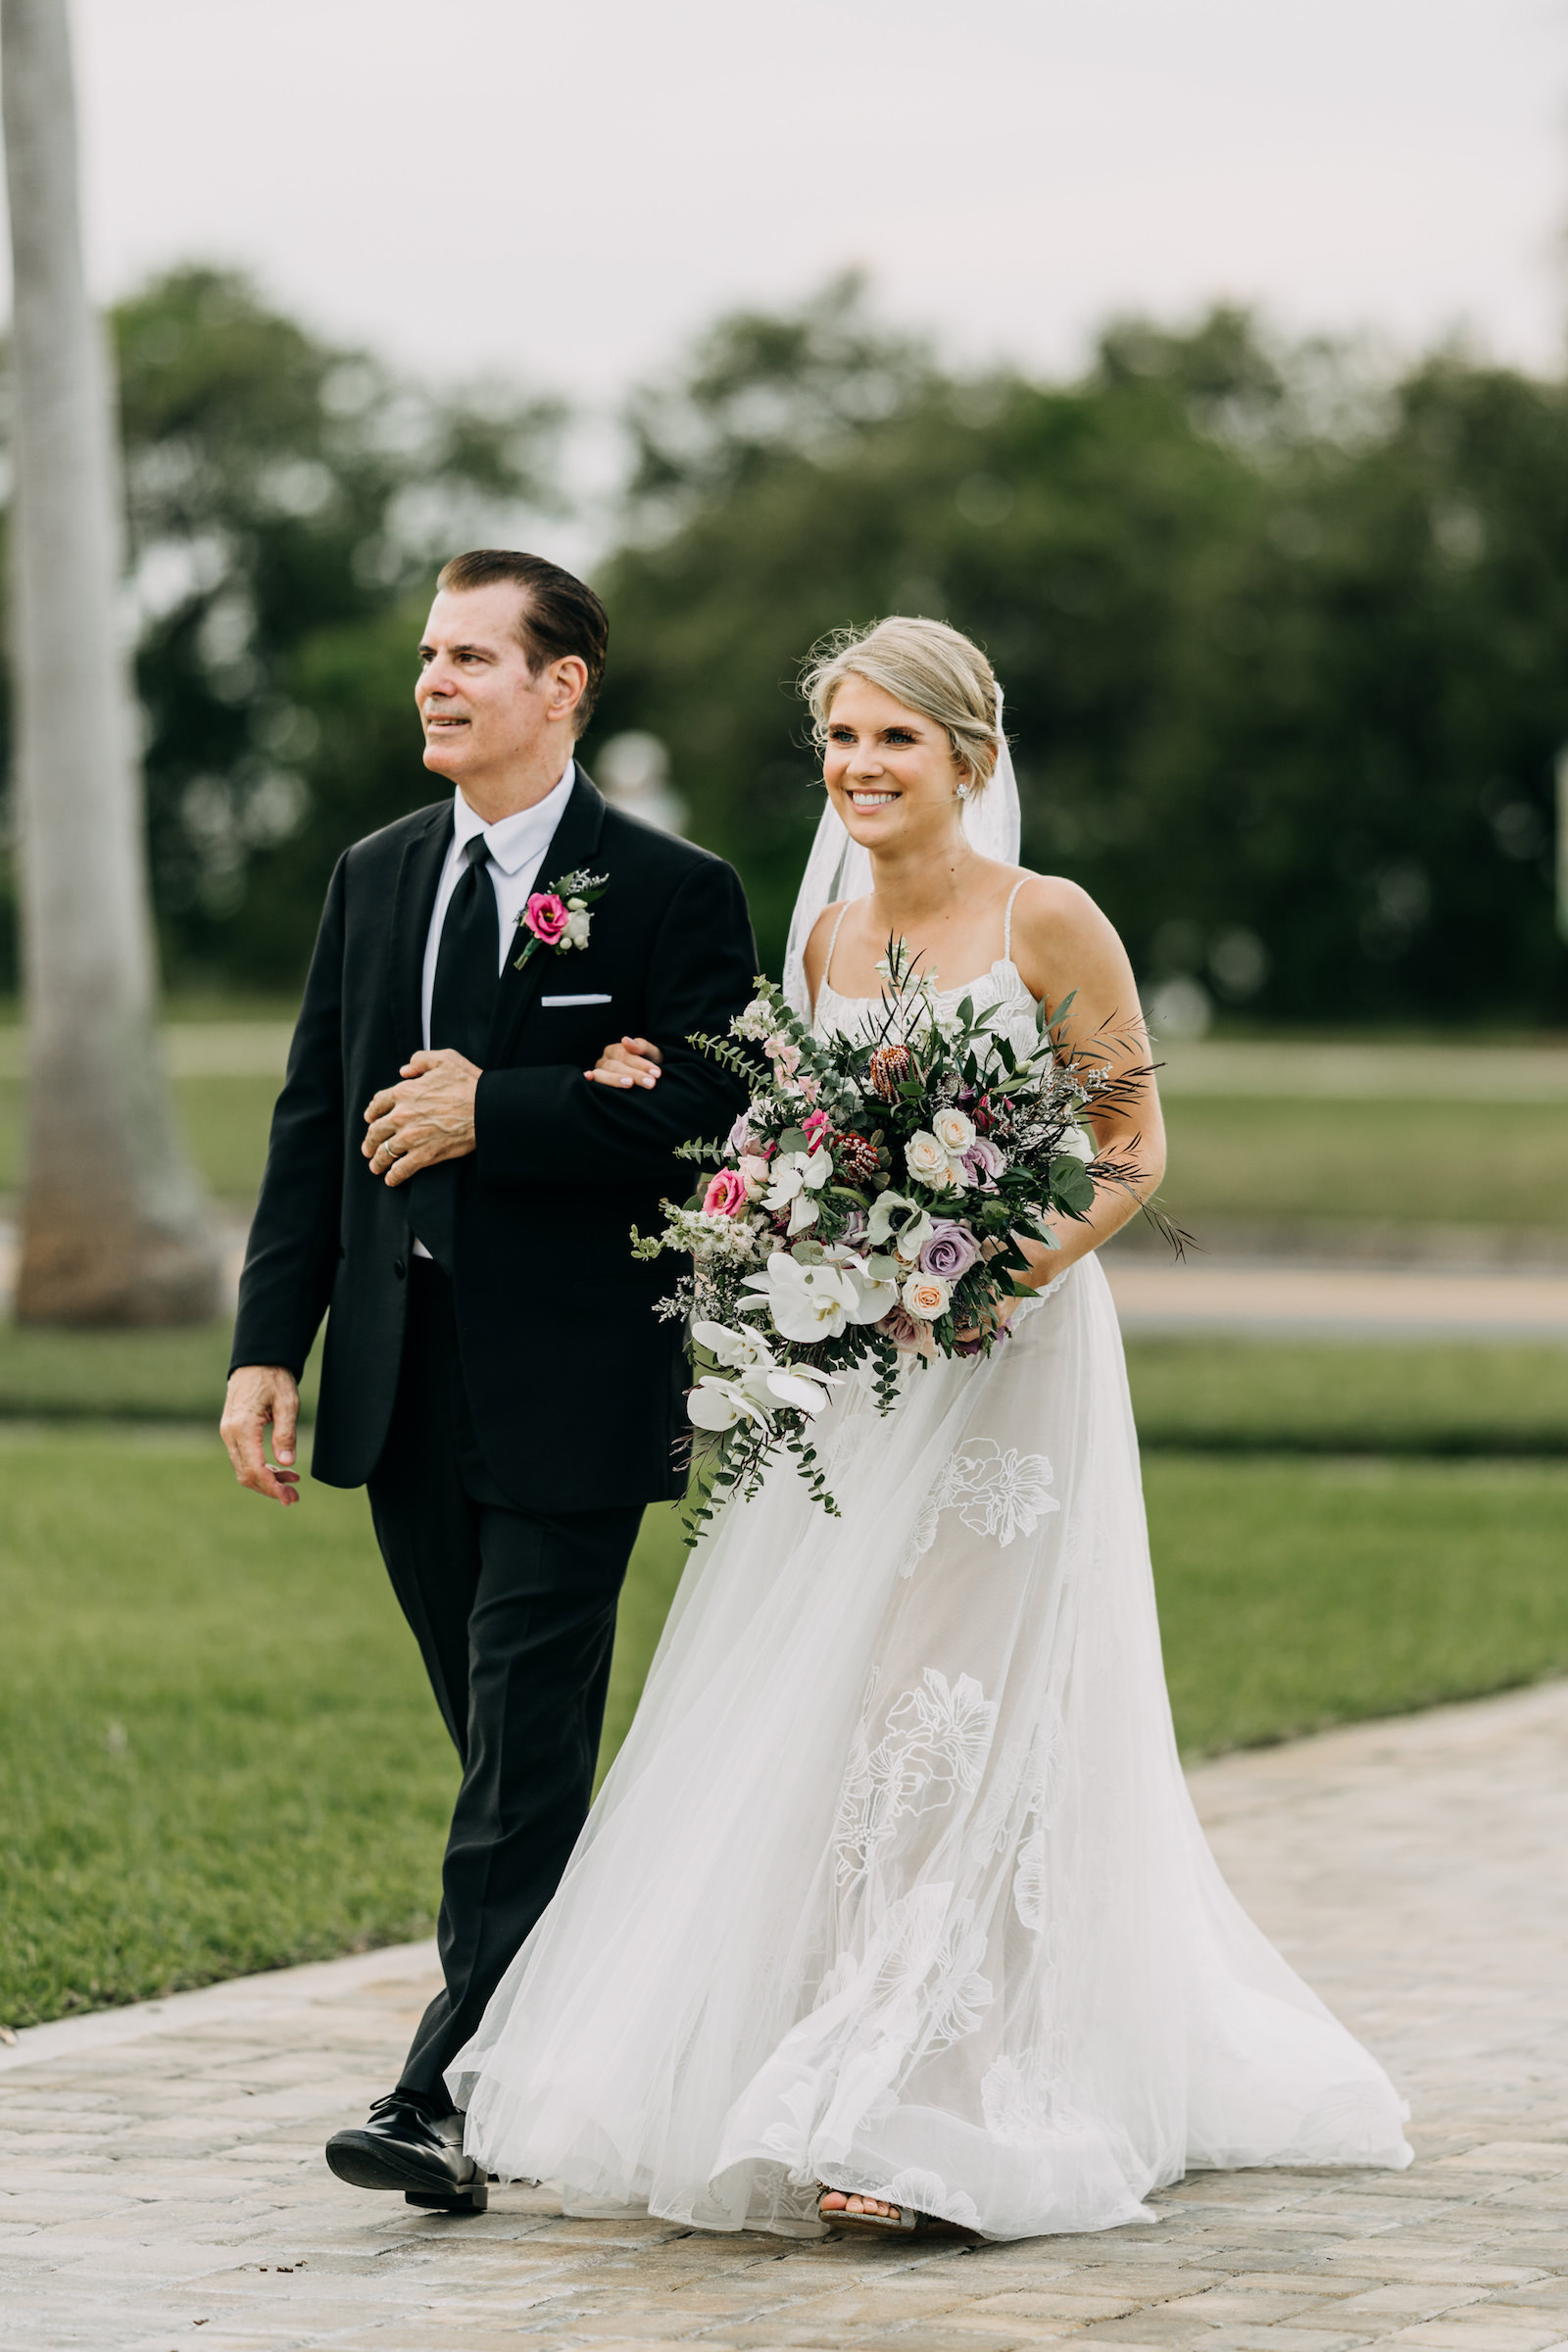 Florida Bride Walking with Father Down Wedding Ceremony Aisle | Tampa Bay Wedding Photographer Amber McWhorter Photography | Wedding Florist Leaf It To Us